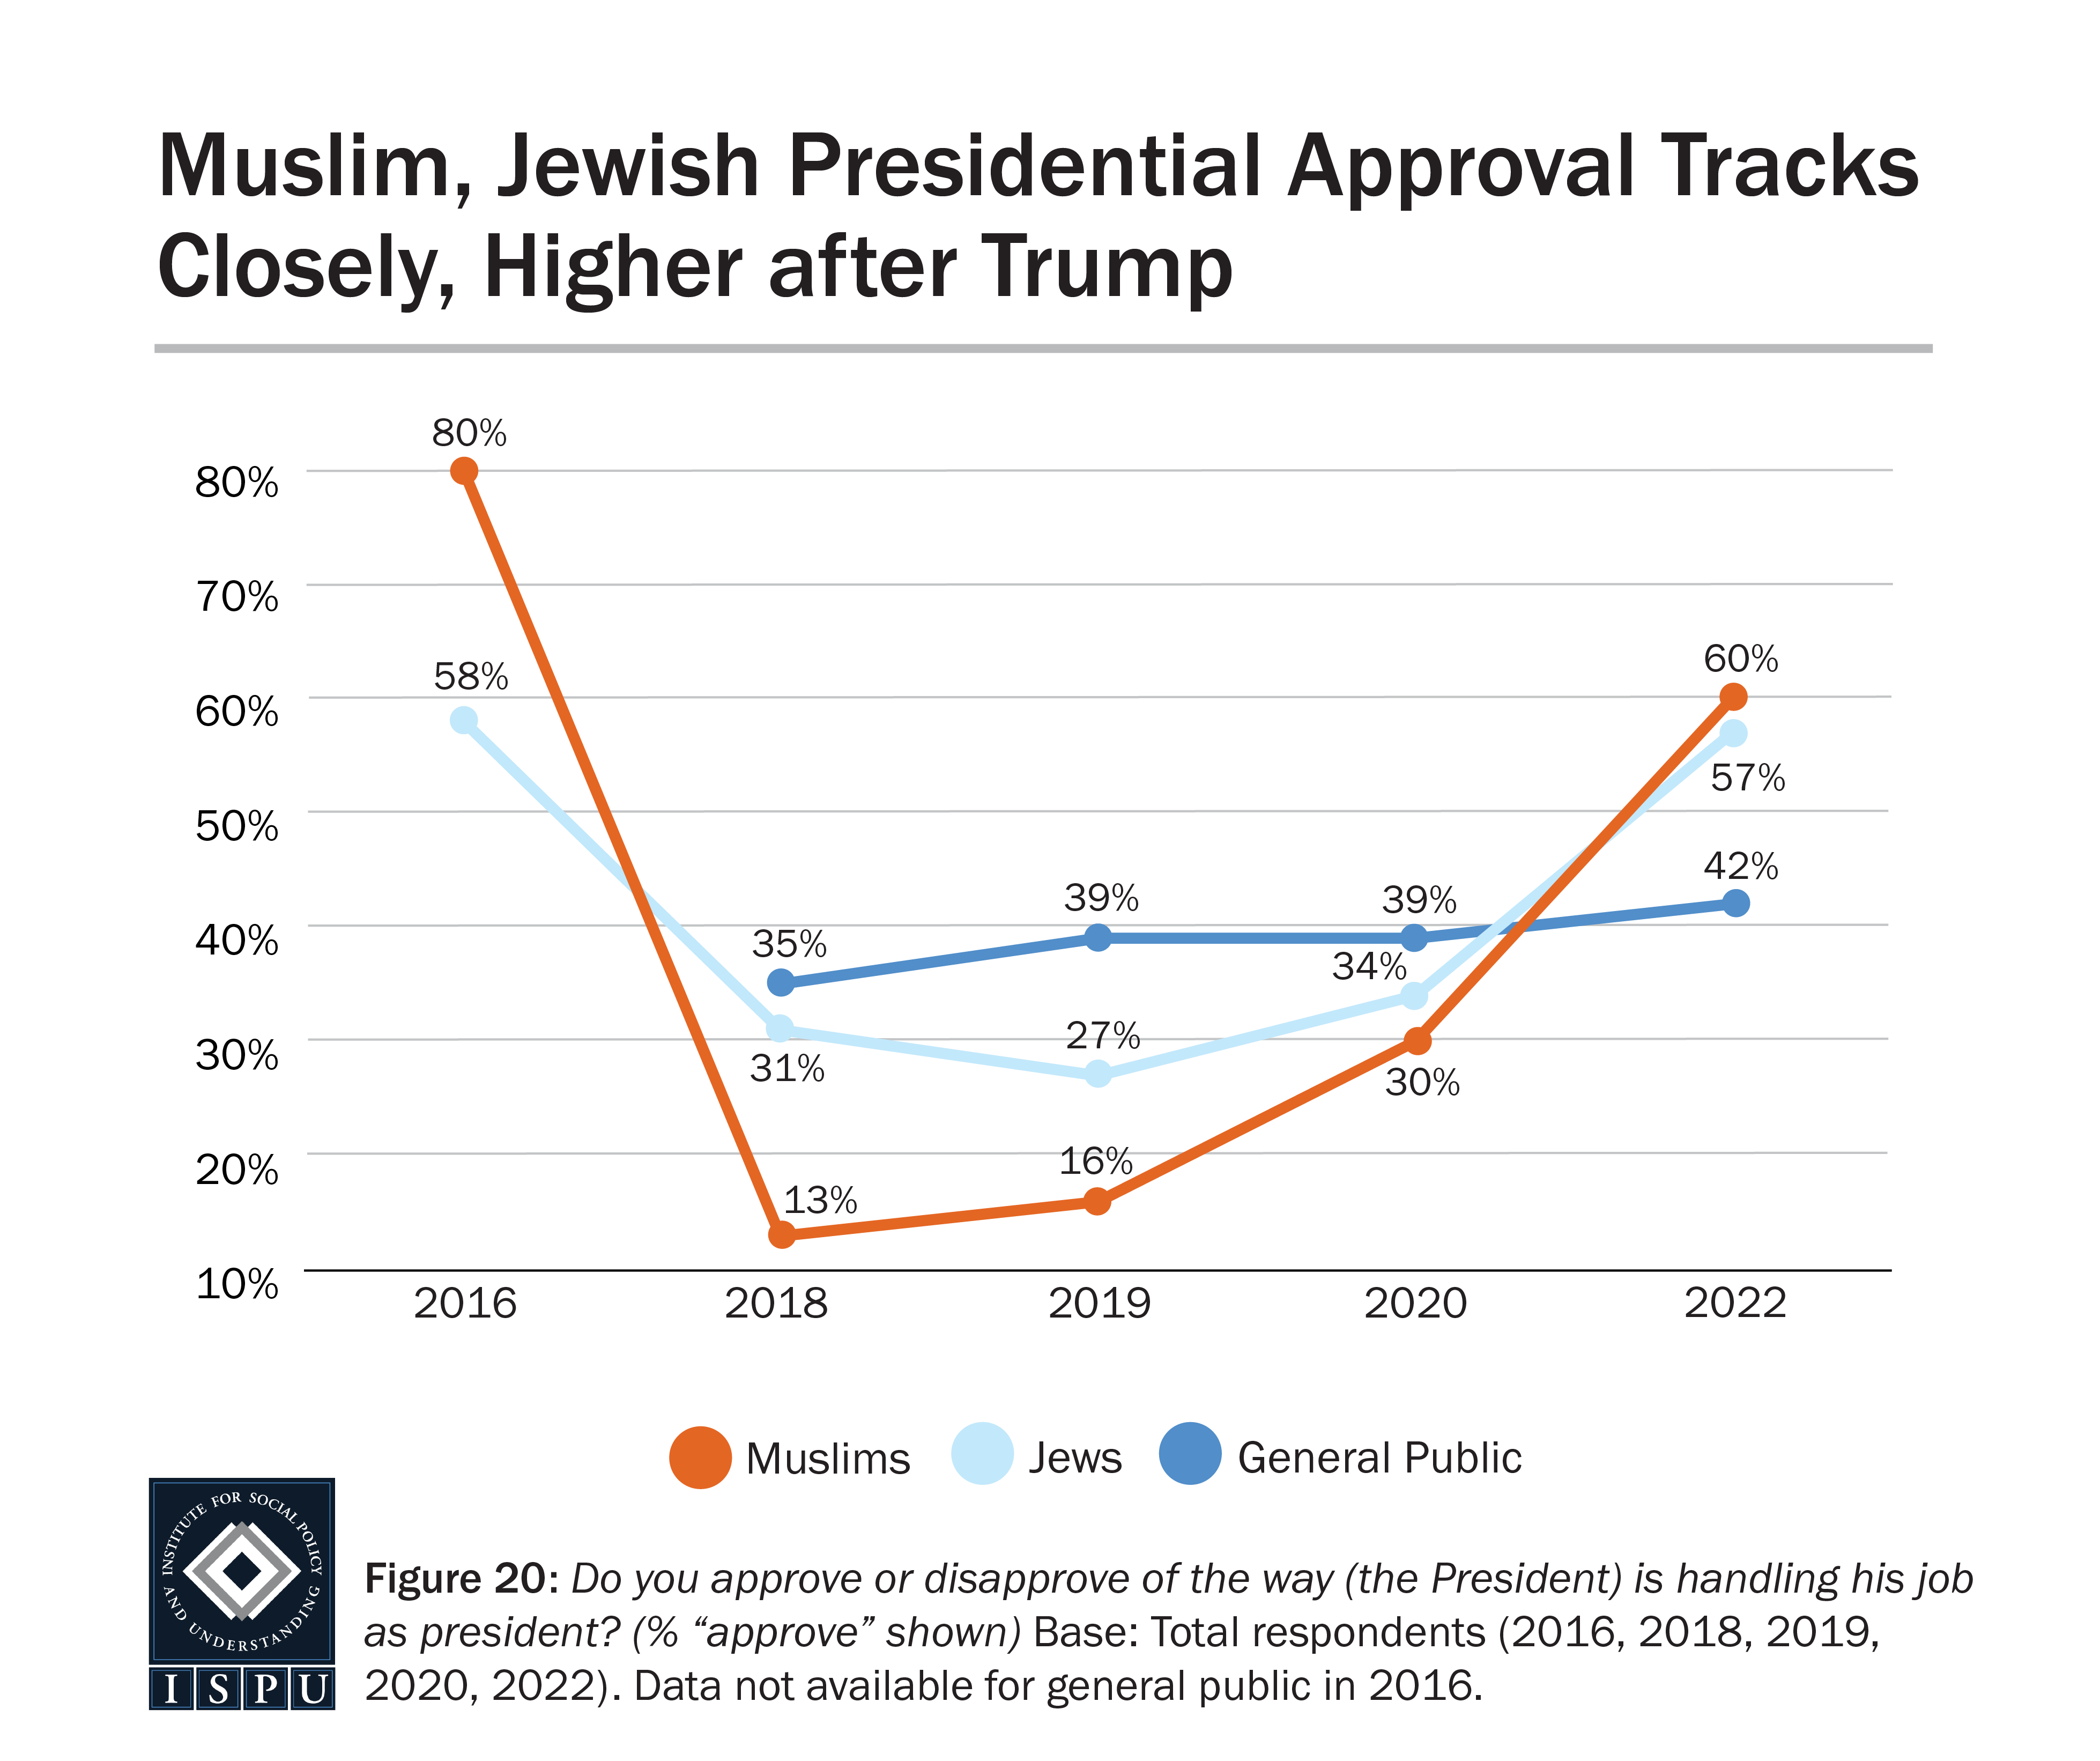 A line graph showing levels of presidential approval among Muslims, Jews, and general public in 2016-2022.